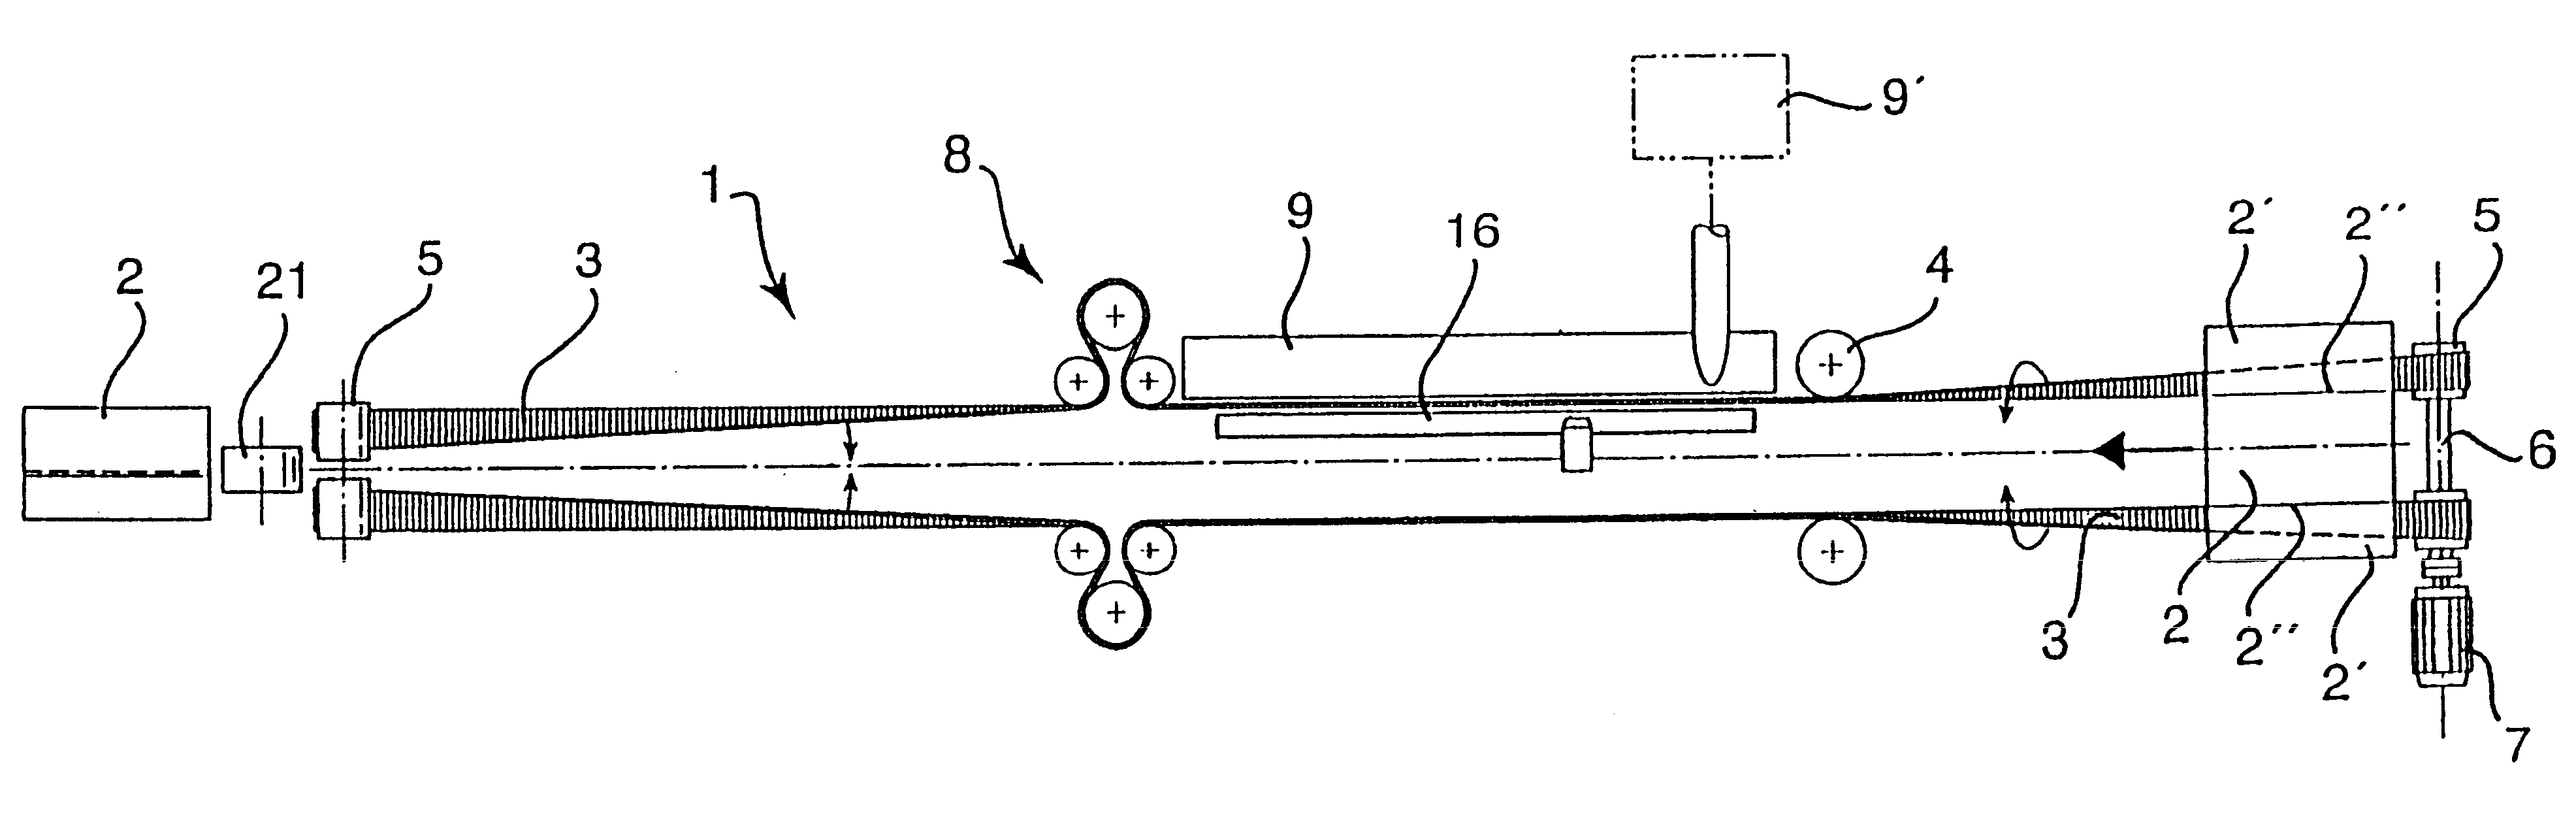 Apparatus for conveying and folding flexible packaging material